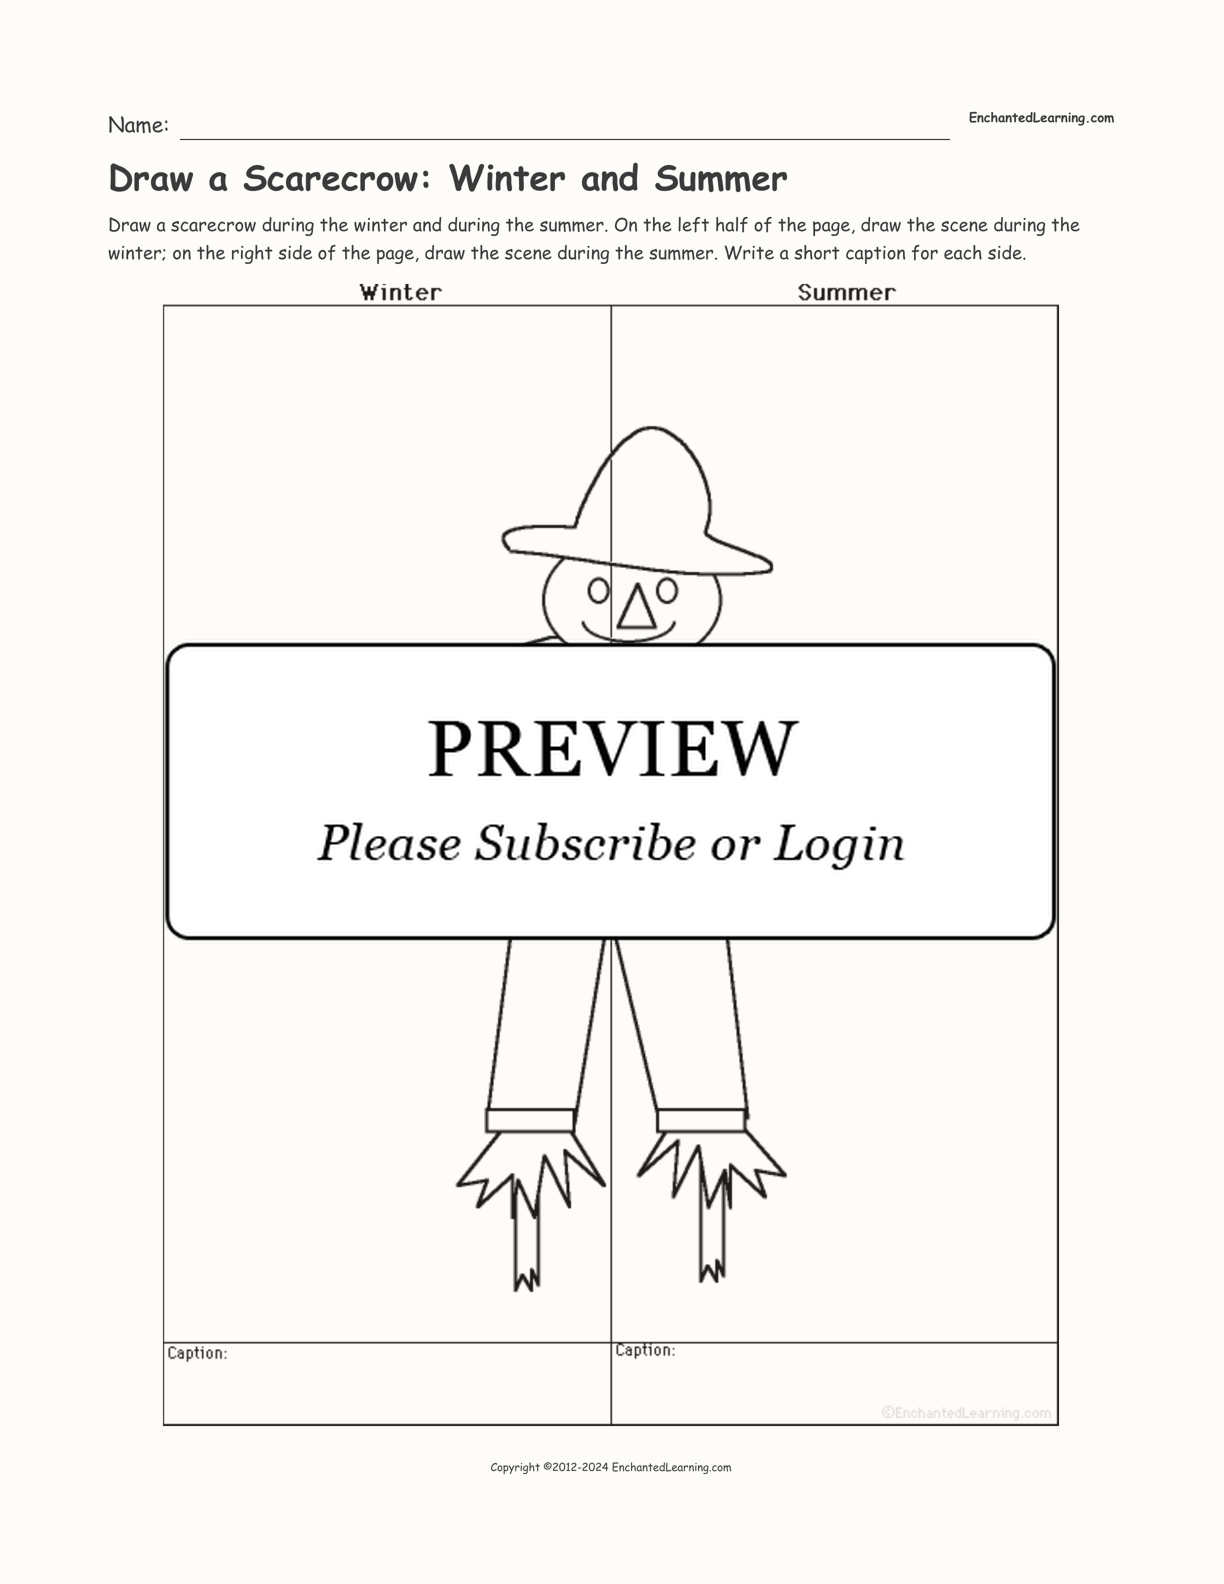 Draw a Scarecrow: Winter and Summer interactive worksheet page 1